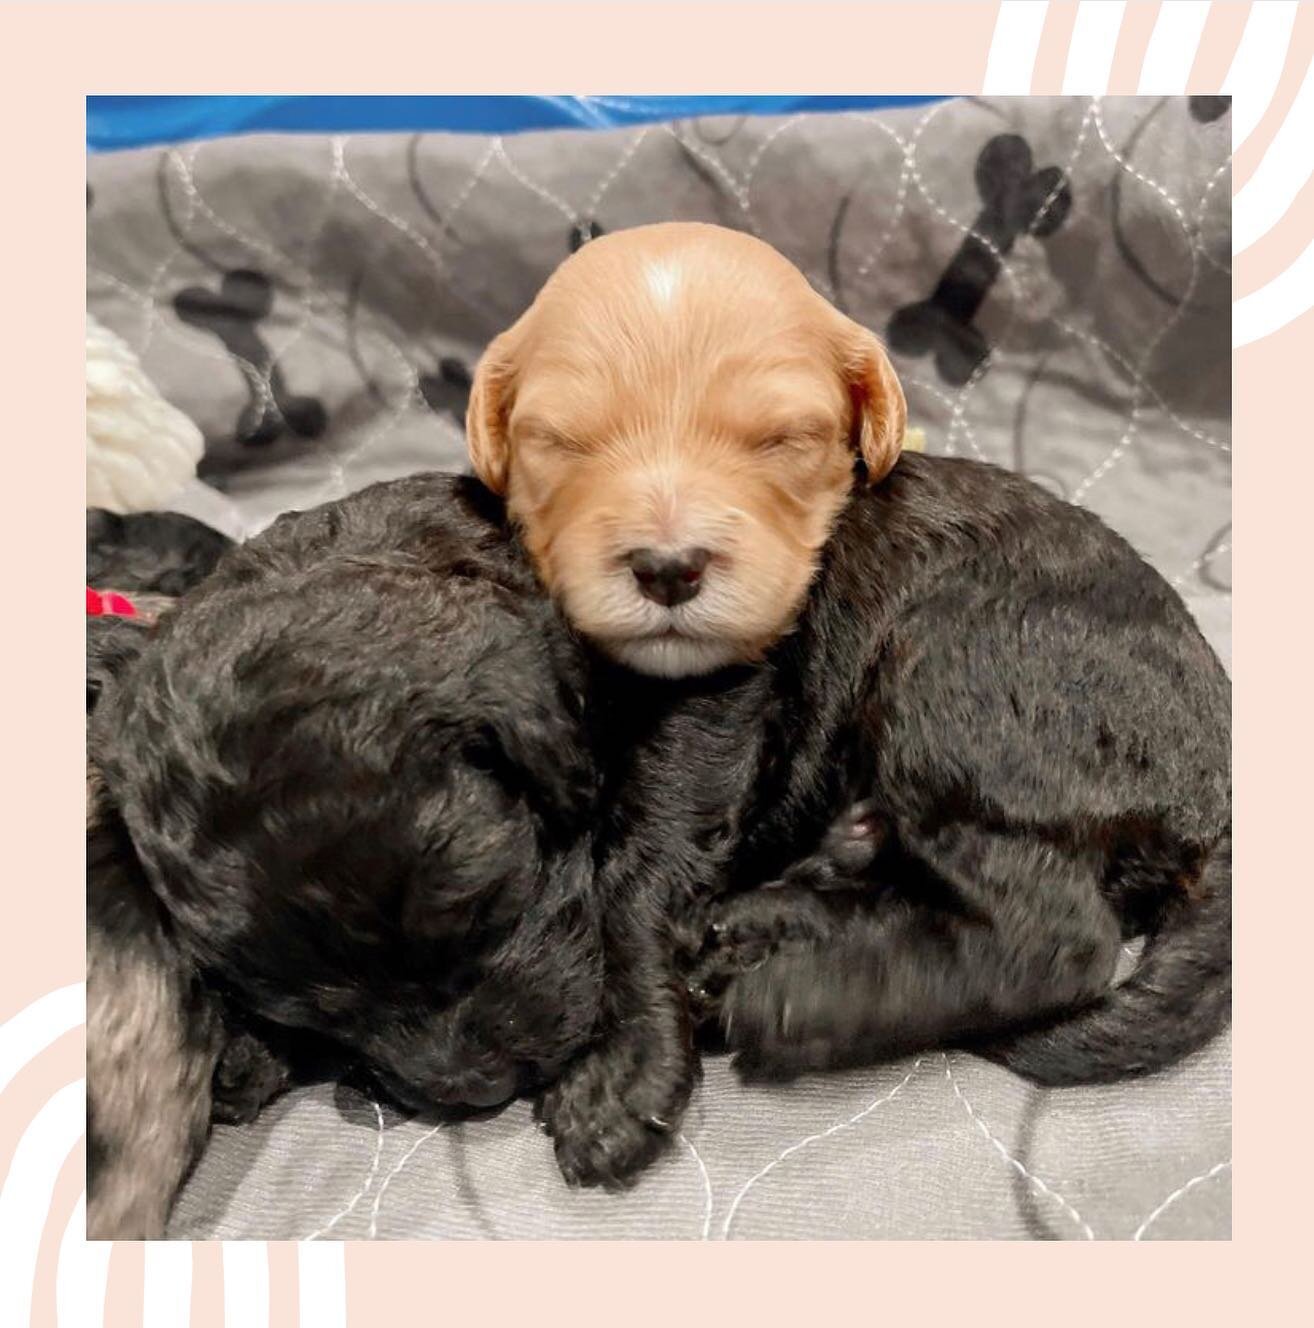 Don&rsquo;t forget about Ellie&rsquo;s cavapoos 🤍 we have 6 available puppies from this litter! Message for details!
.
.
.

#cavapoosofinstagram #doodlesofinstagram #doodlesofarizona #arizona #phoenix #doodlebreeder #arizonabreeder #responsiblebreed